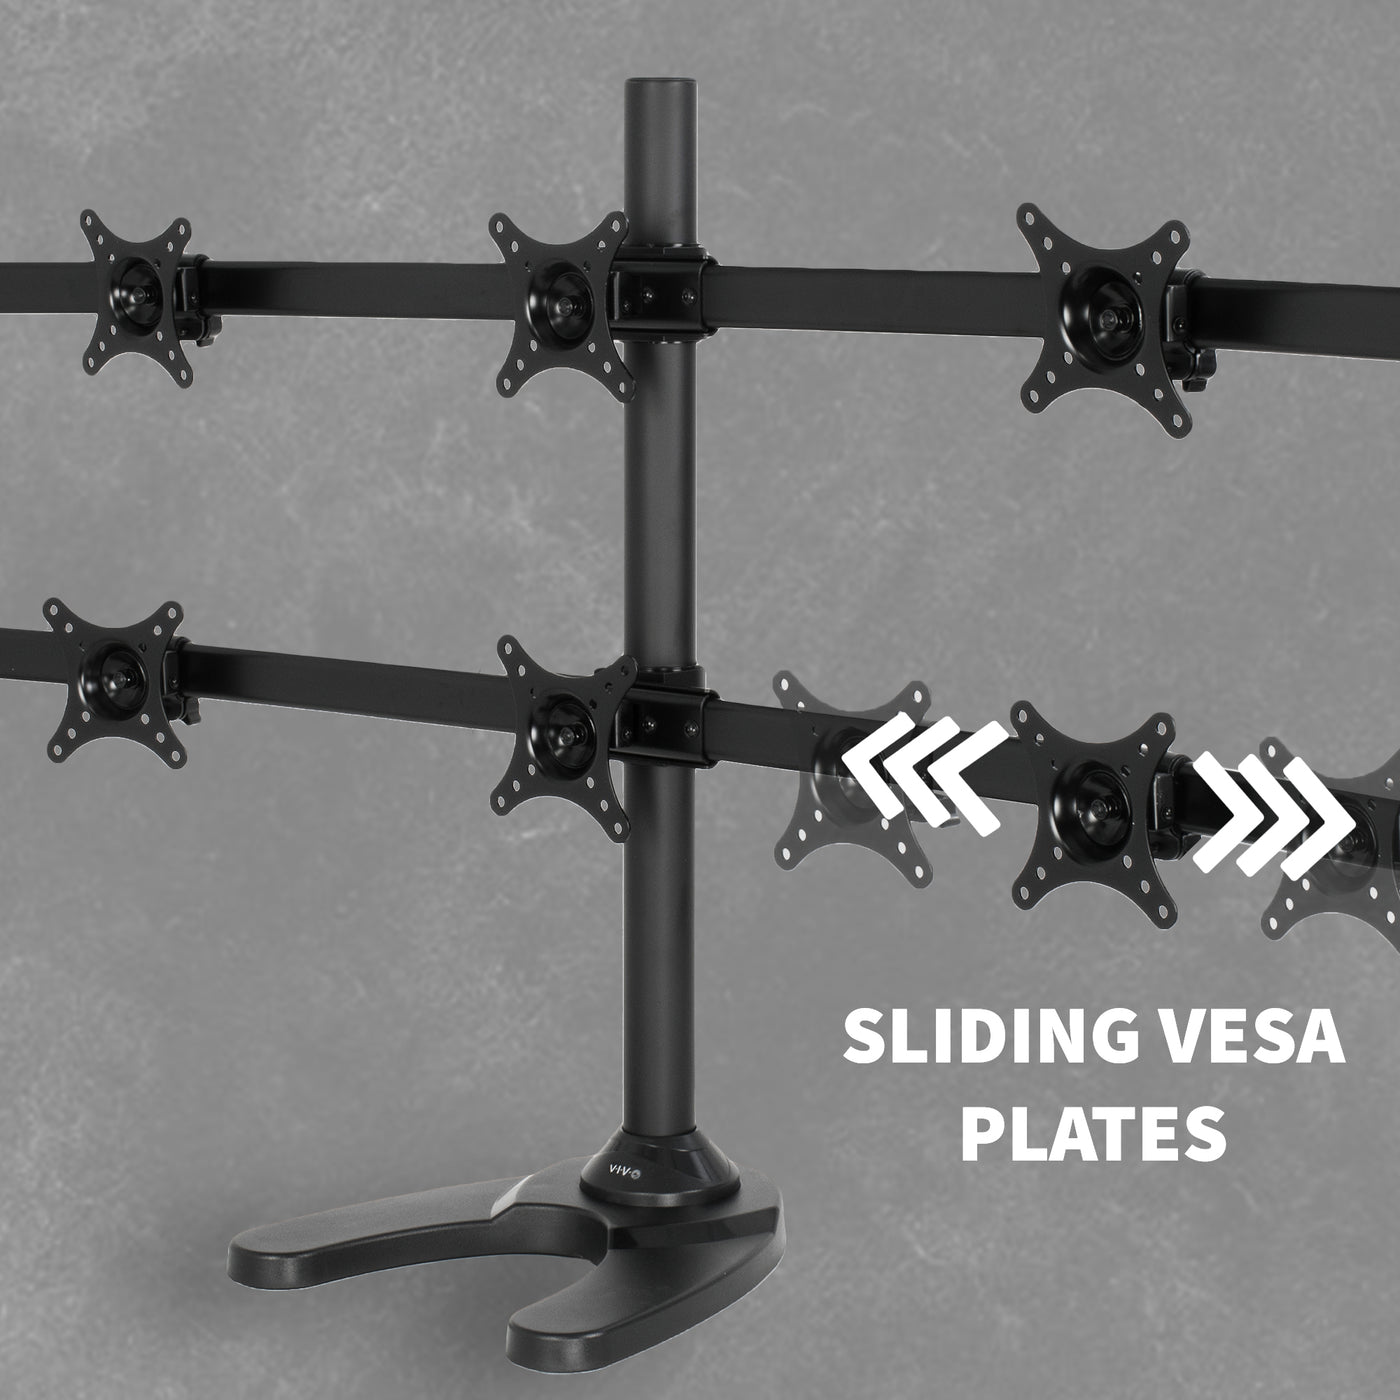 High grade steel and aluminum hex monitor stand.